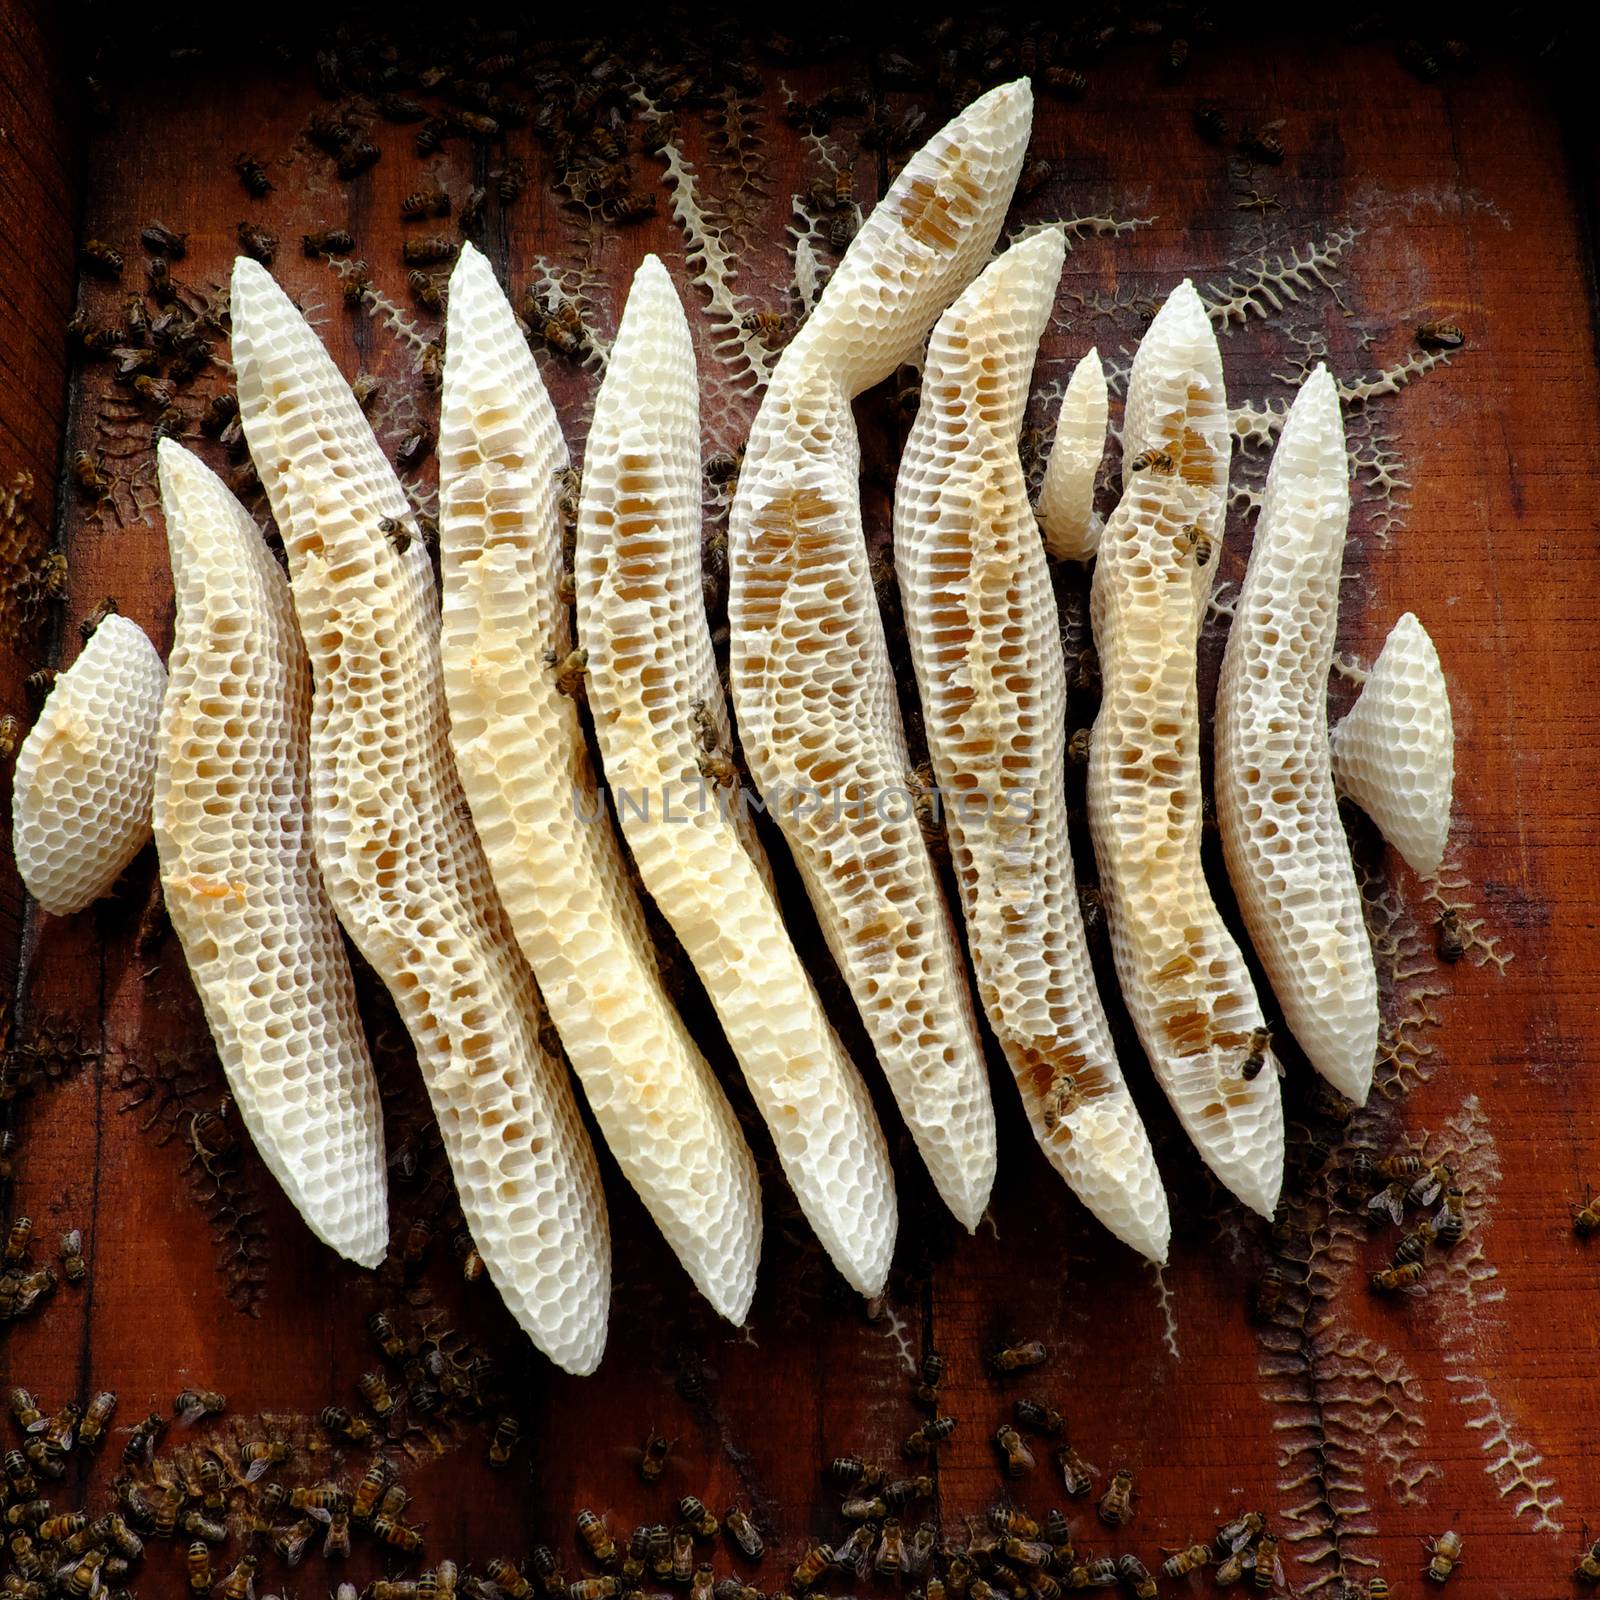 Group of honeycomb in the box with honey, bee and beeswax at Binh Phuoc, Viet Nam, apiculture is popular in Vietnam, many beekeeper go everywhere with his bee hive to product honey and wax